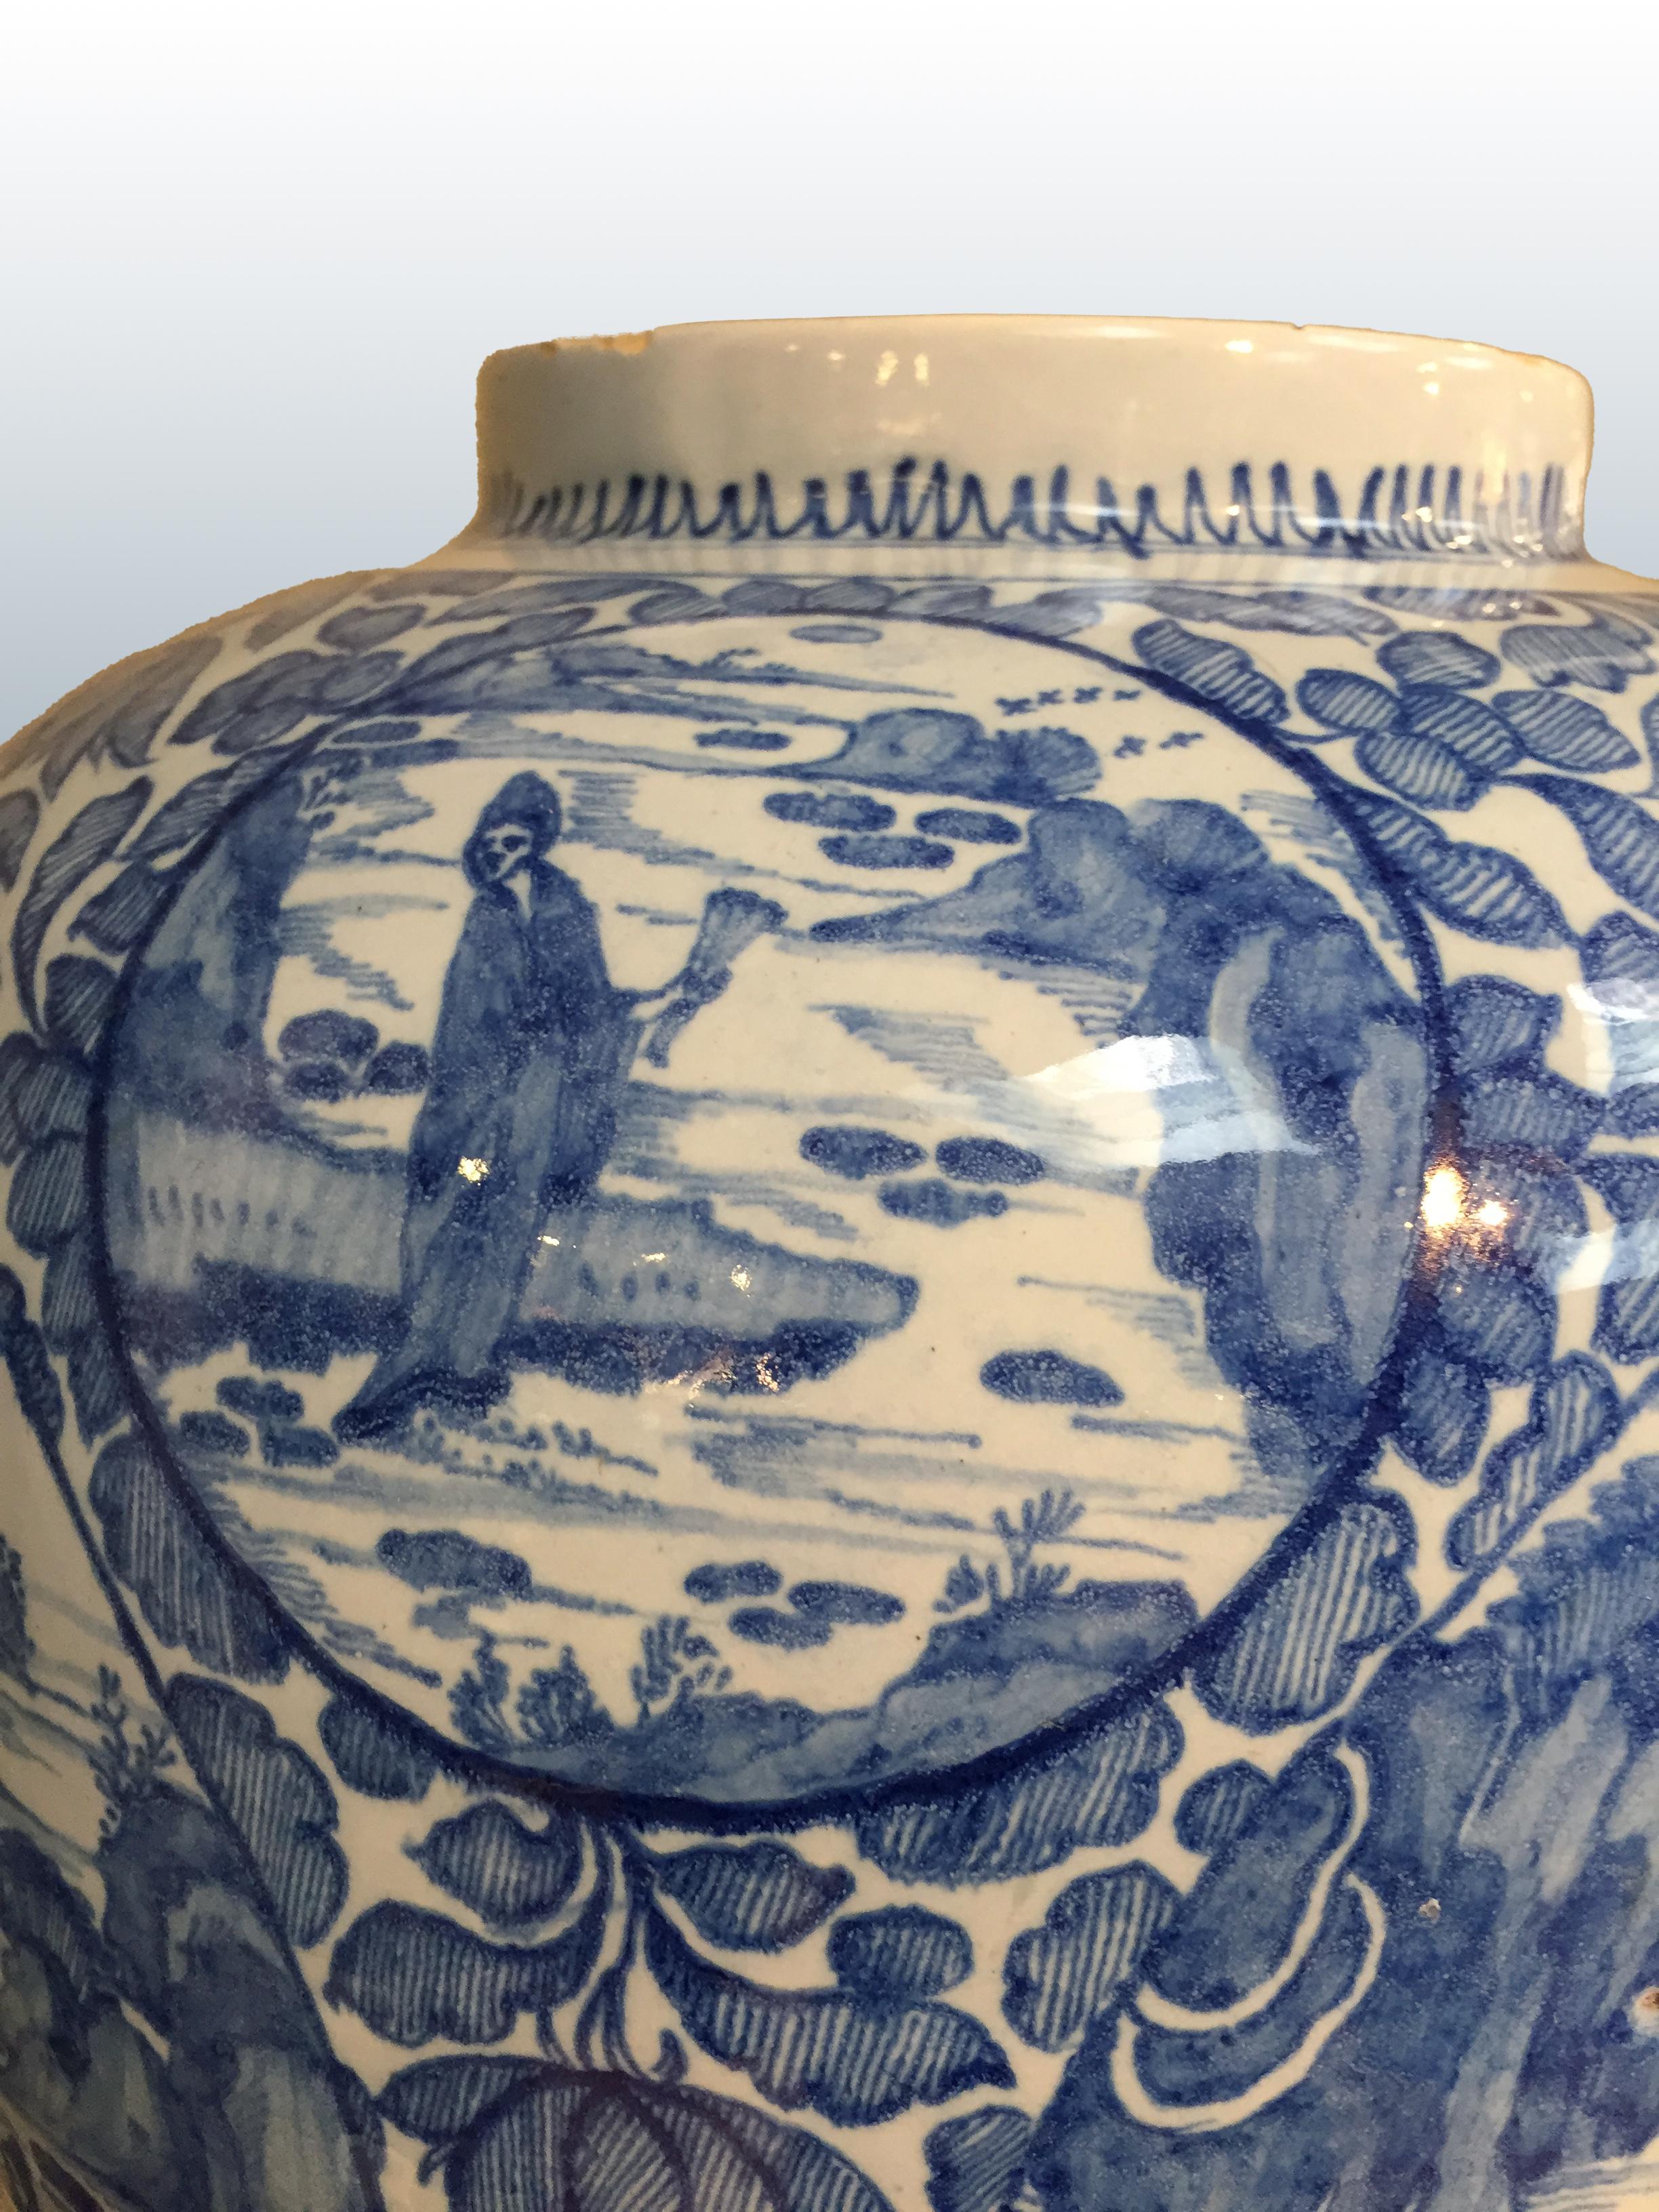 Fired Very Large Blue and White Dutch Delft Vase in Chinoiserie, Early 18th Century For Sale